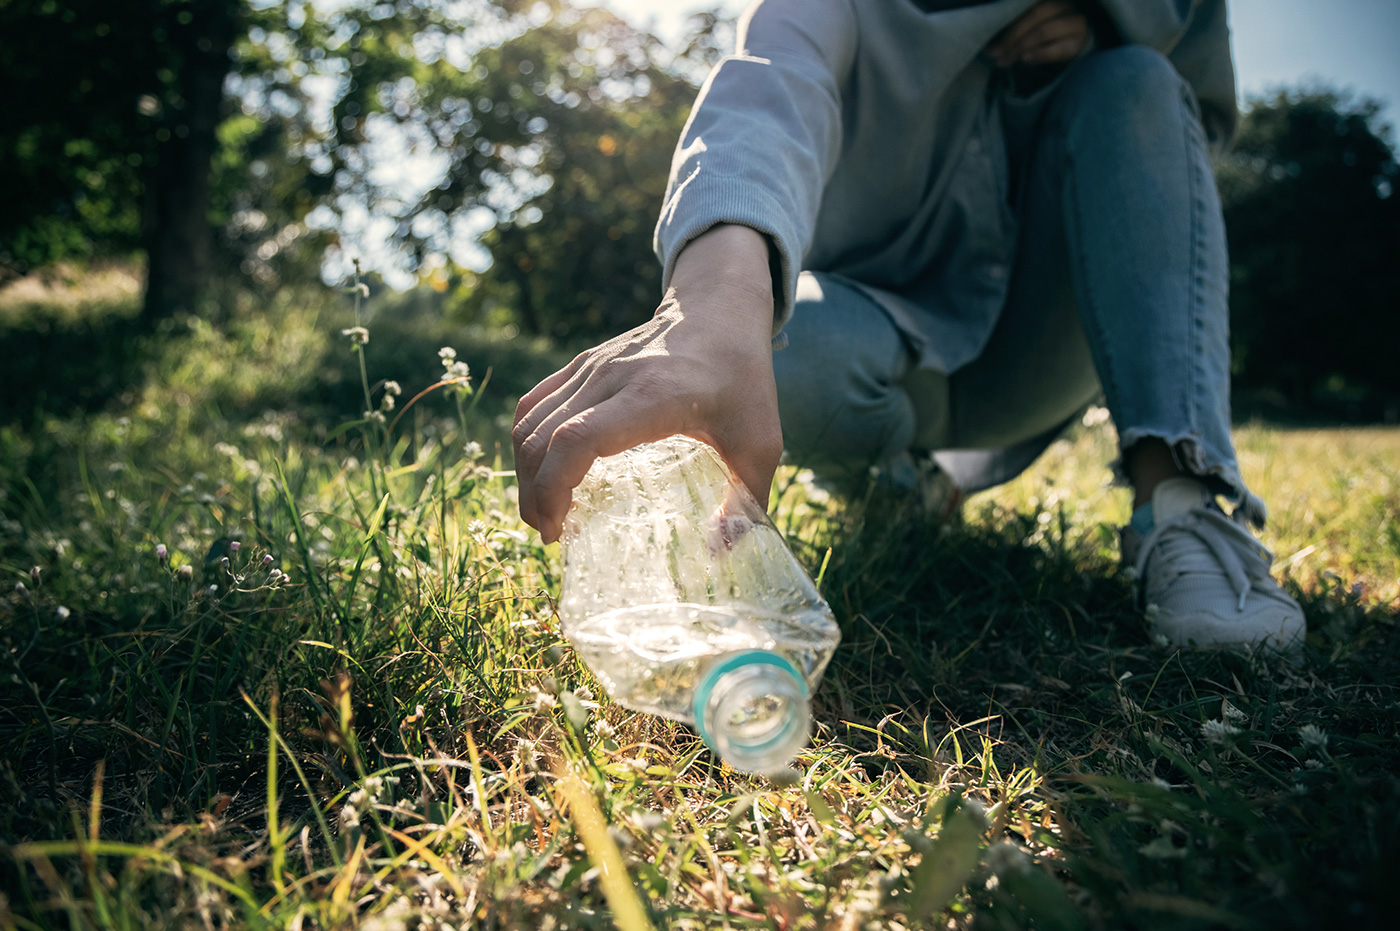 Person picking up an empty and crushed water bottle that was sitting in the grass.